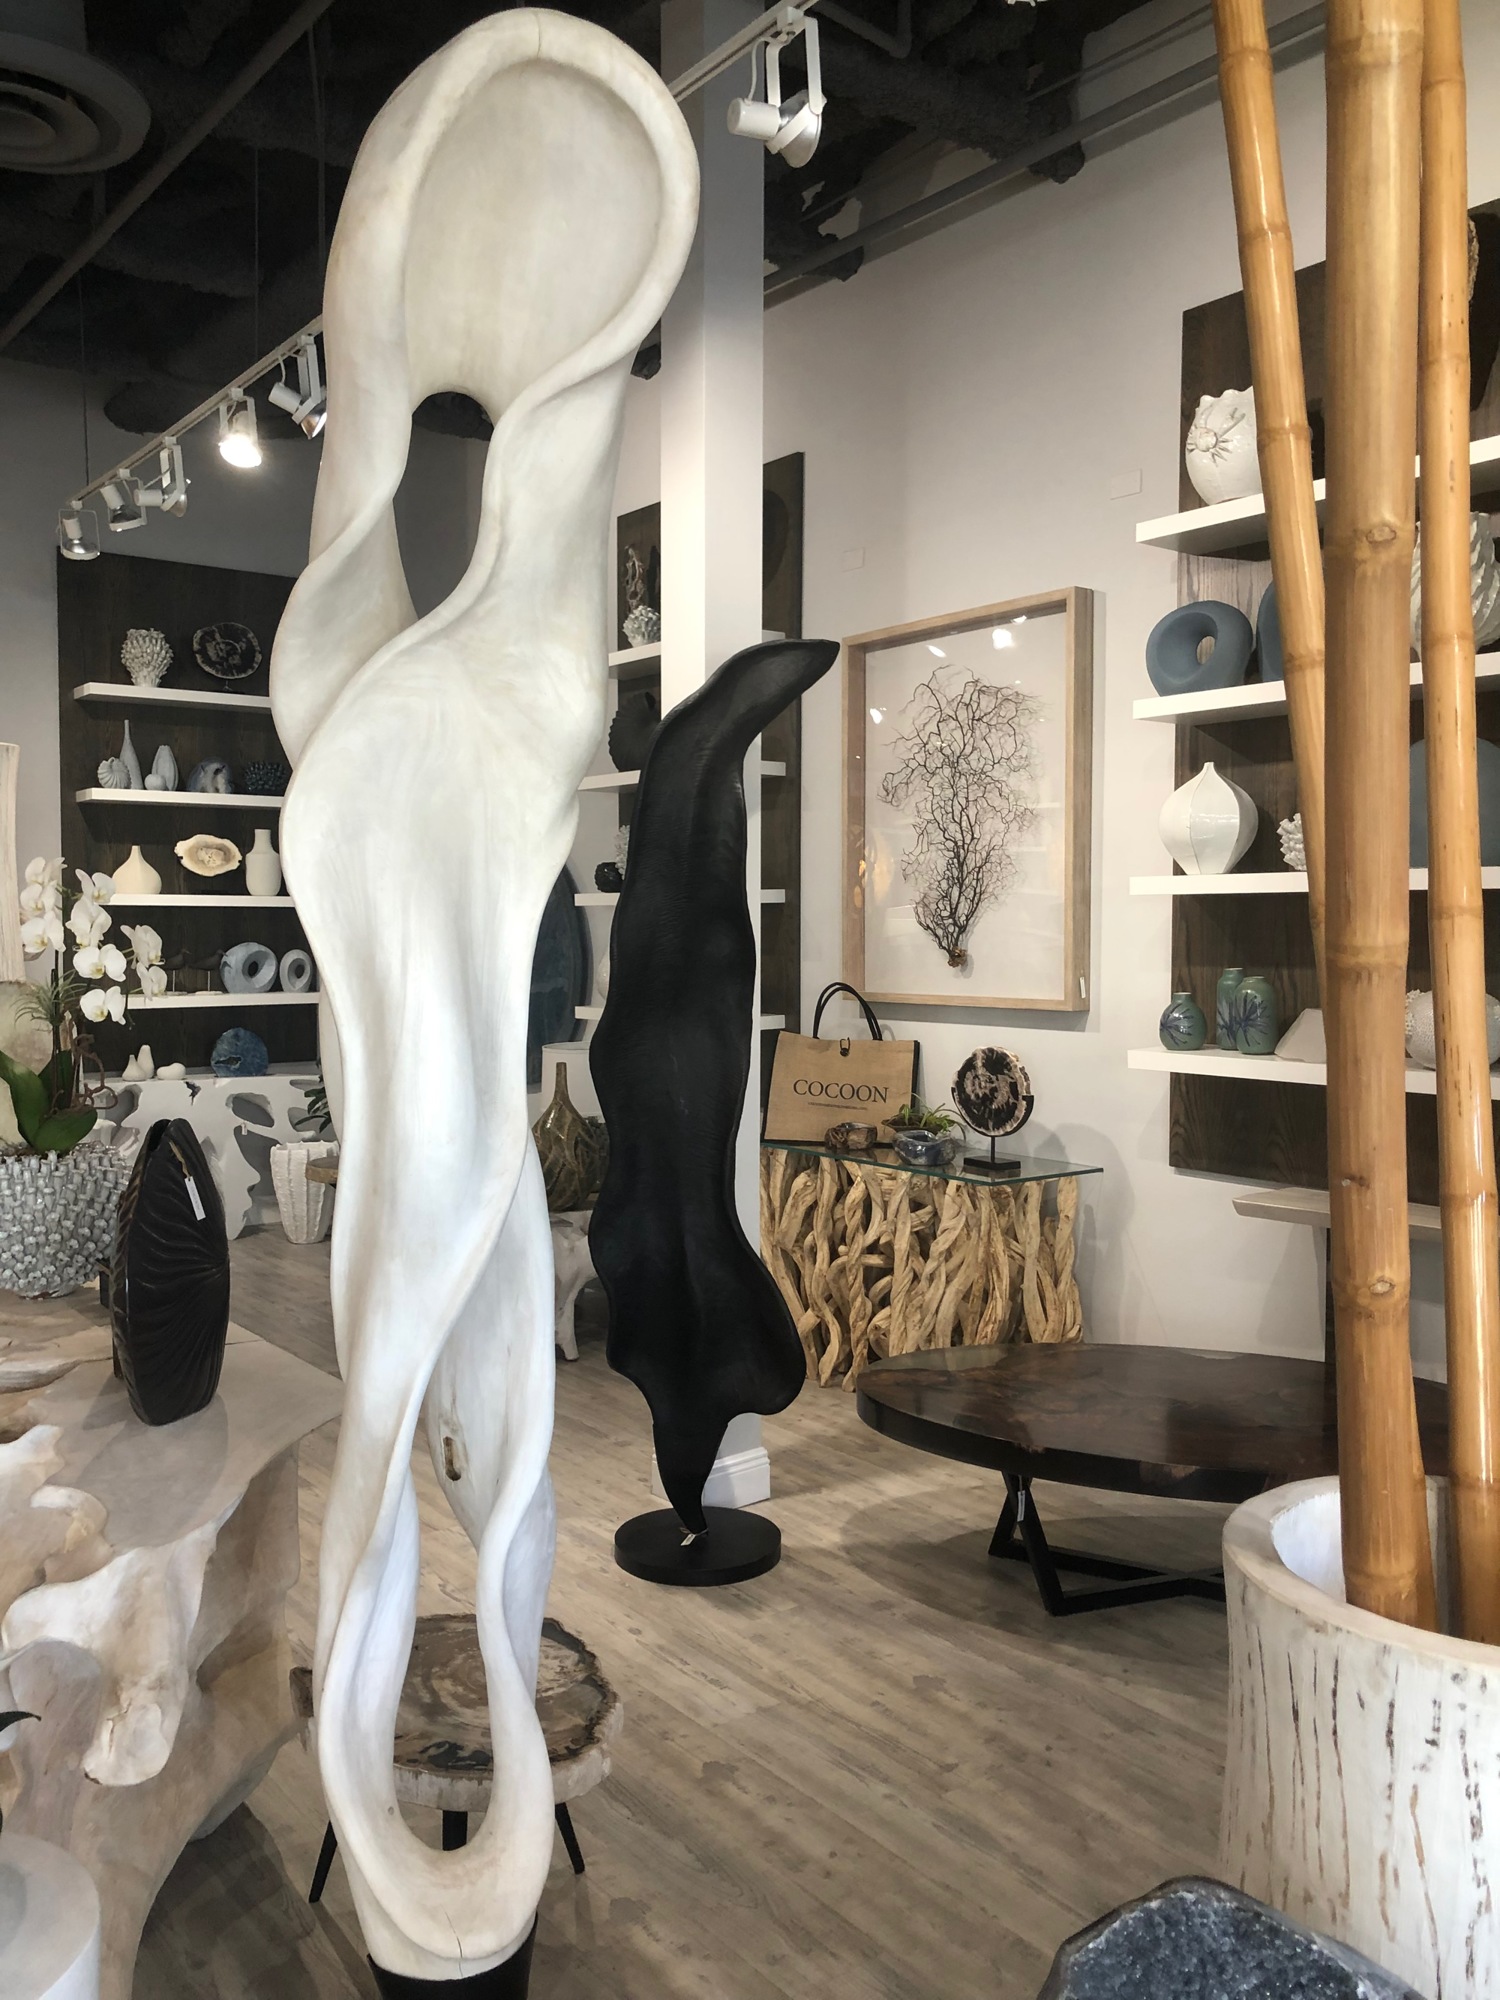 Courtesy. Cocoon Gallery opened a showroom on Fifth Avenue Naples in early 2020.